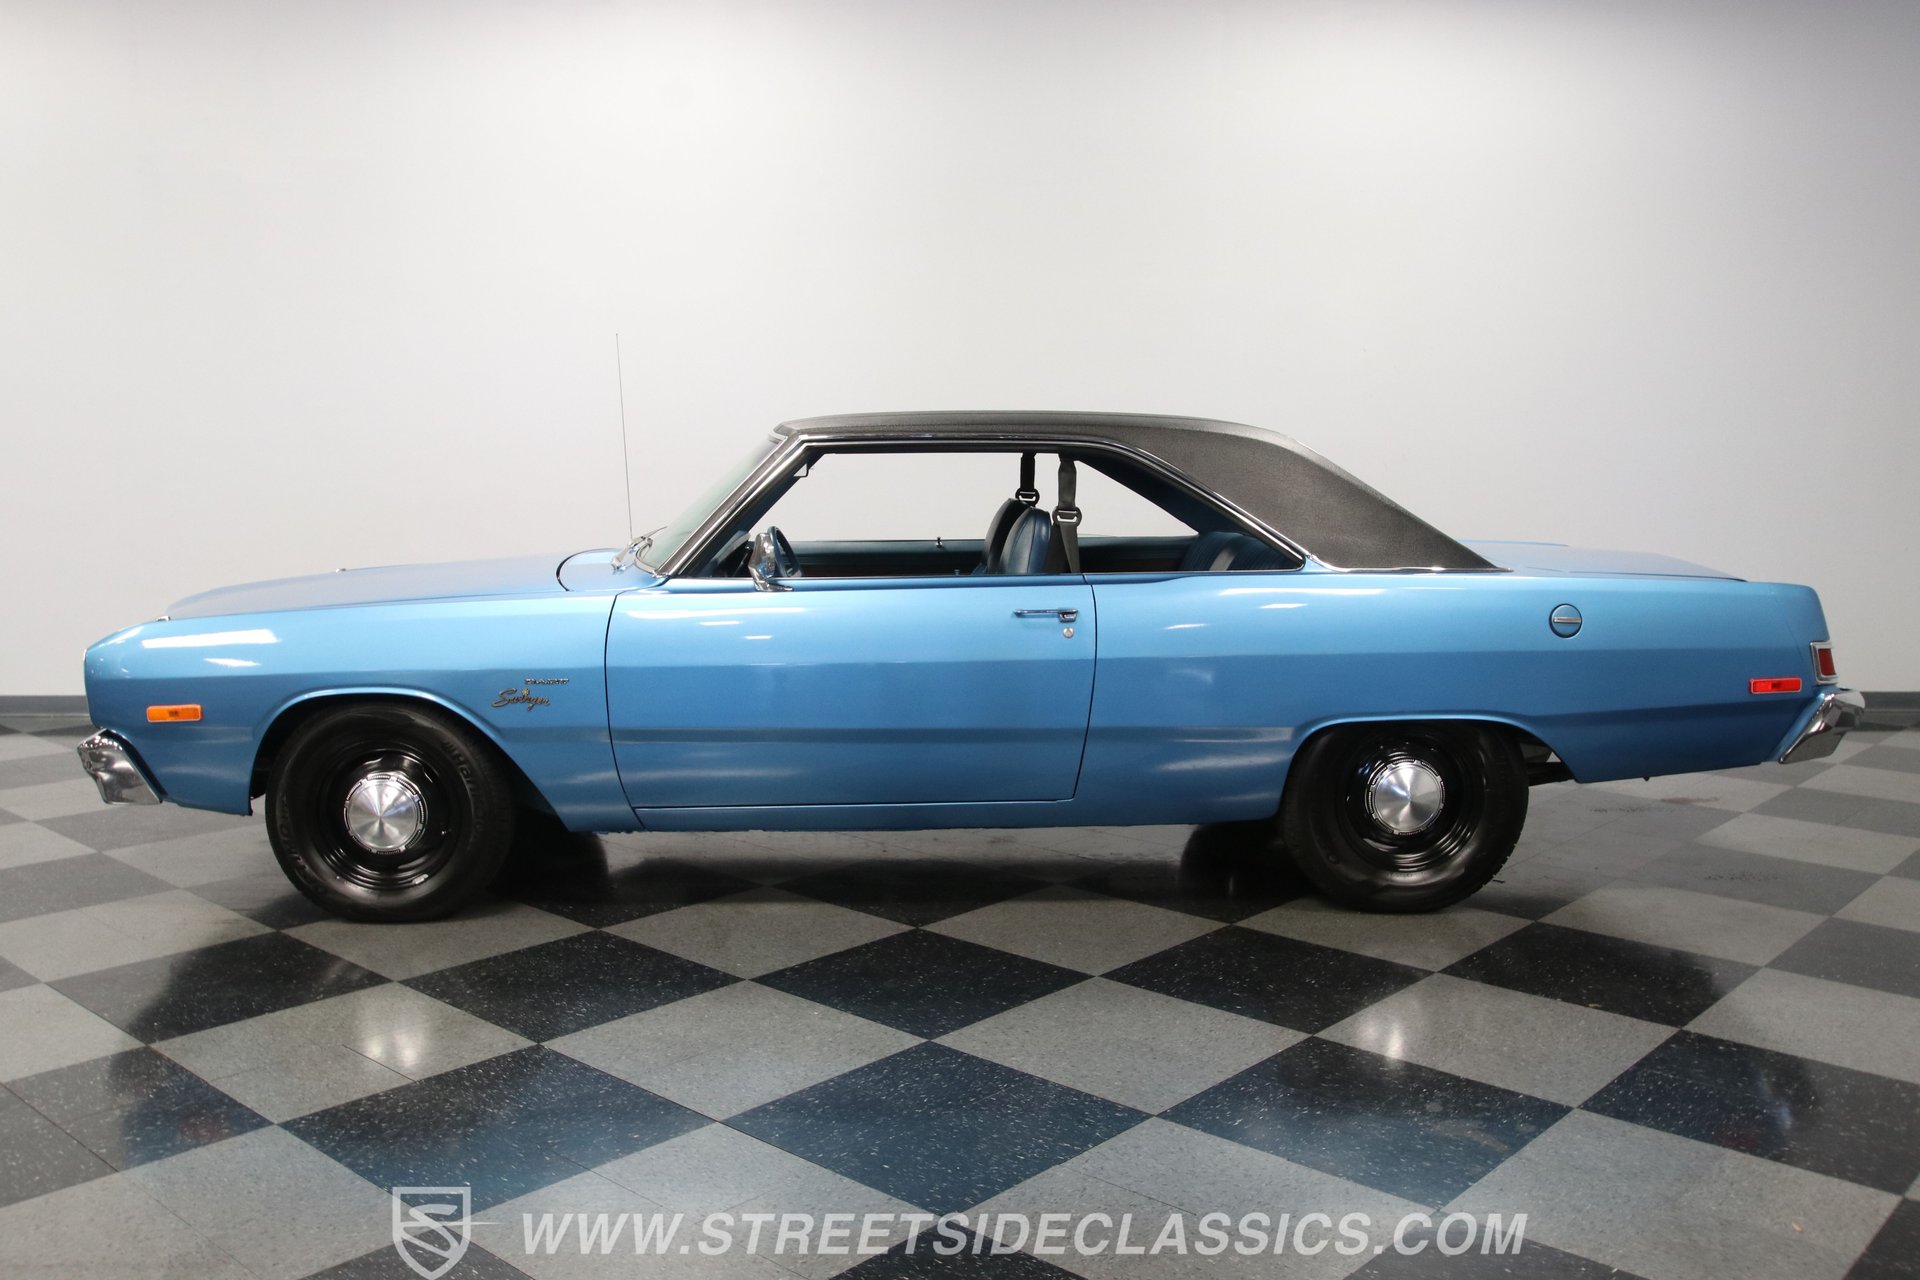 1974 Dodge Dart Classic Cars for Sale image